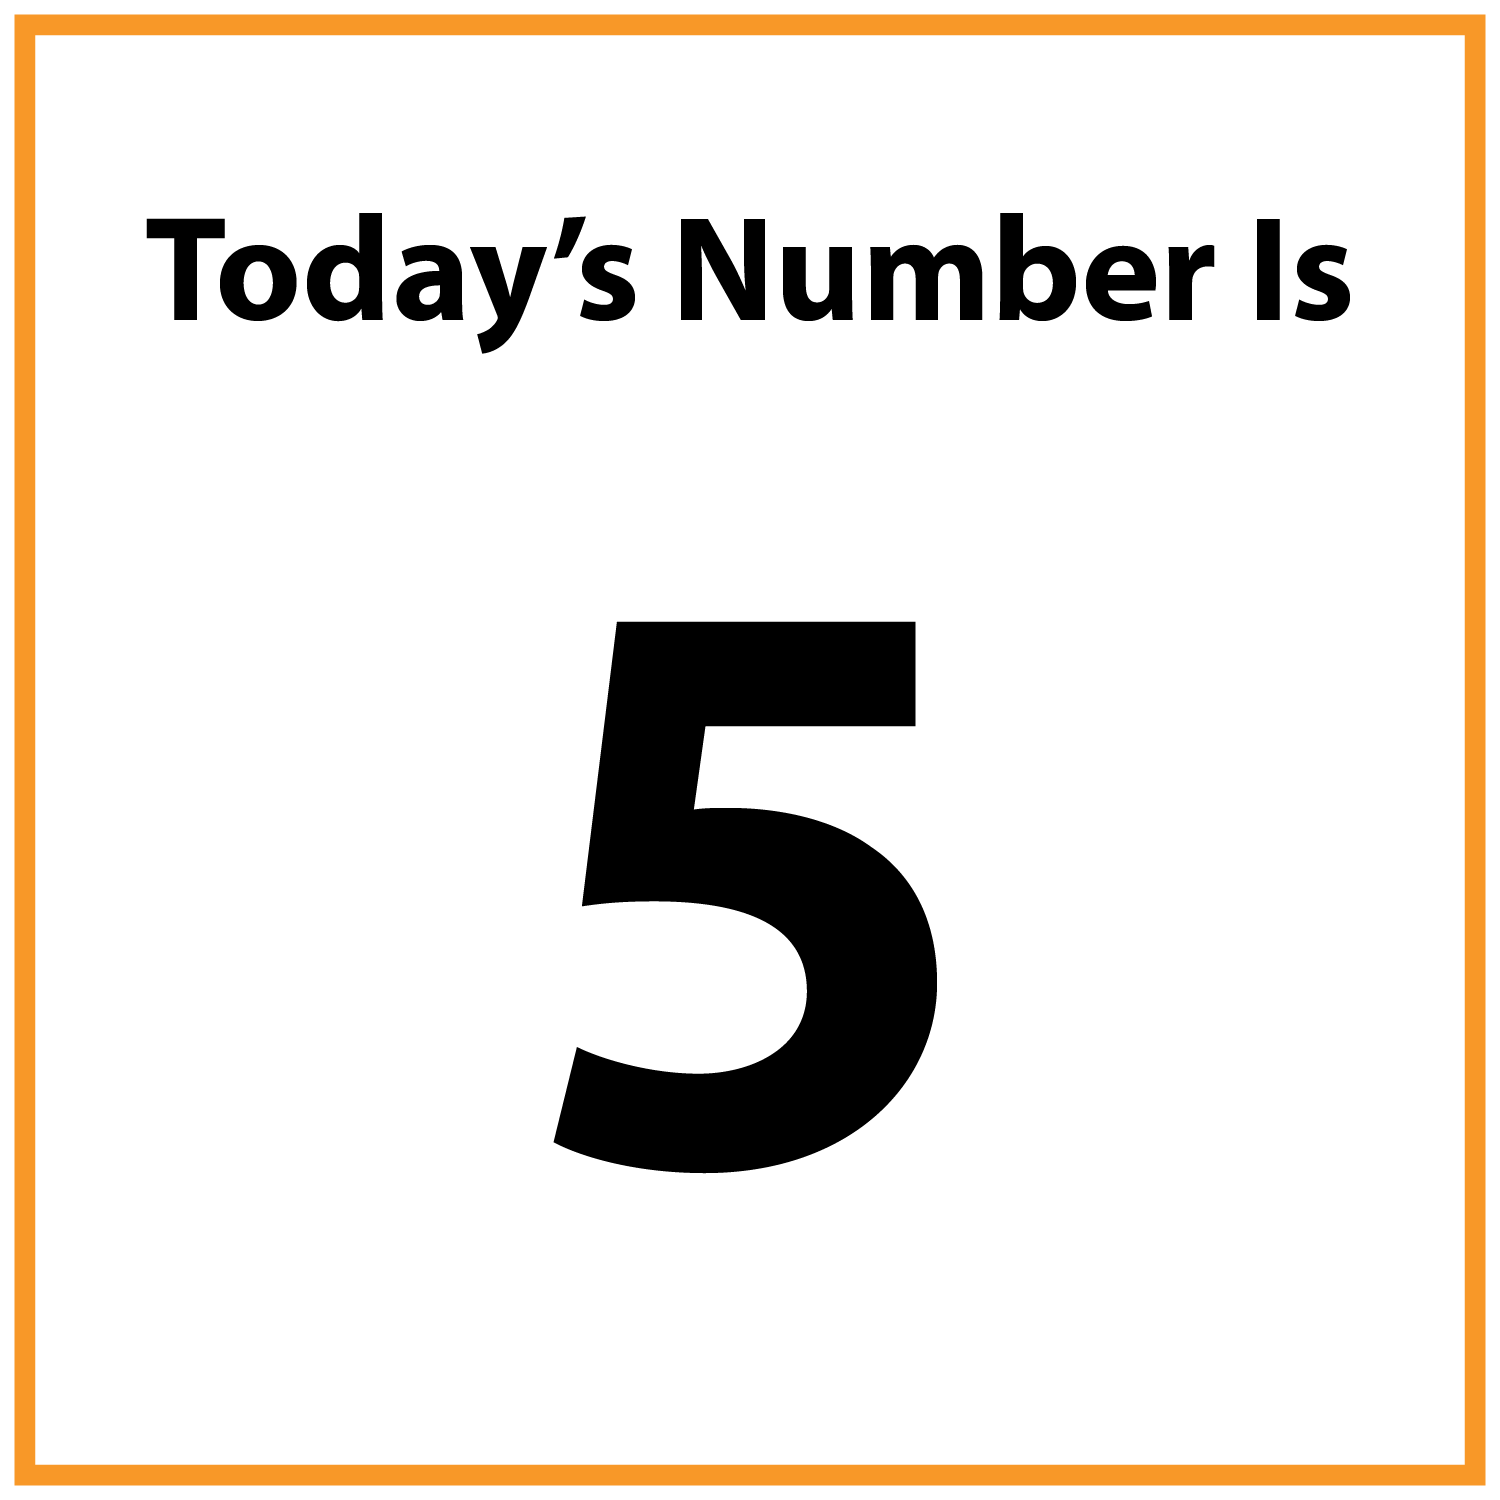 Today's number is 5.